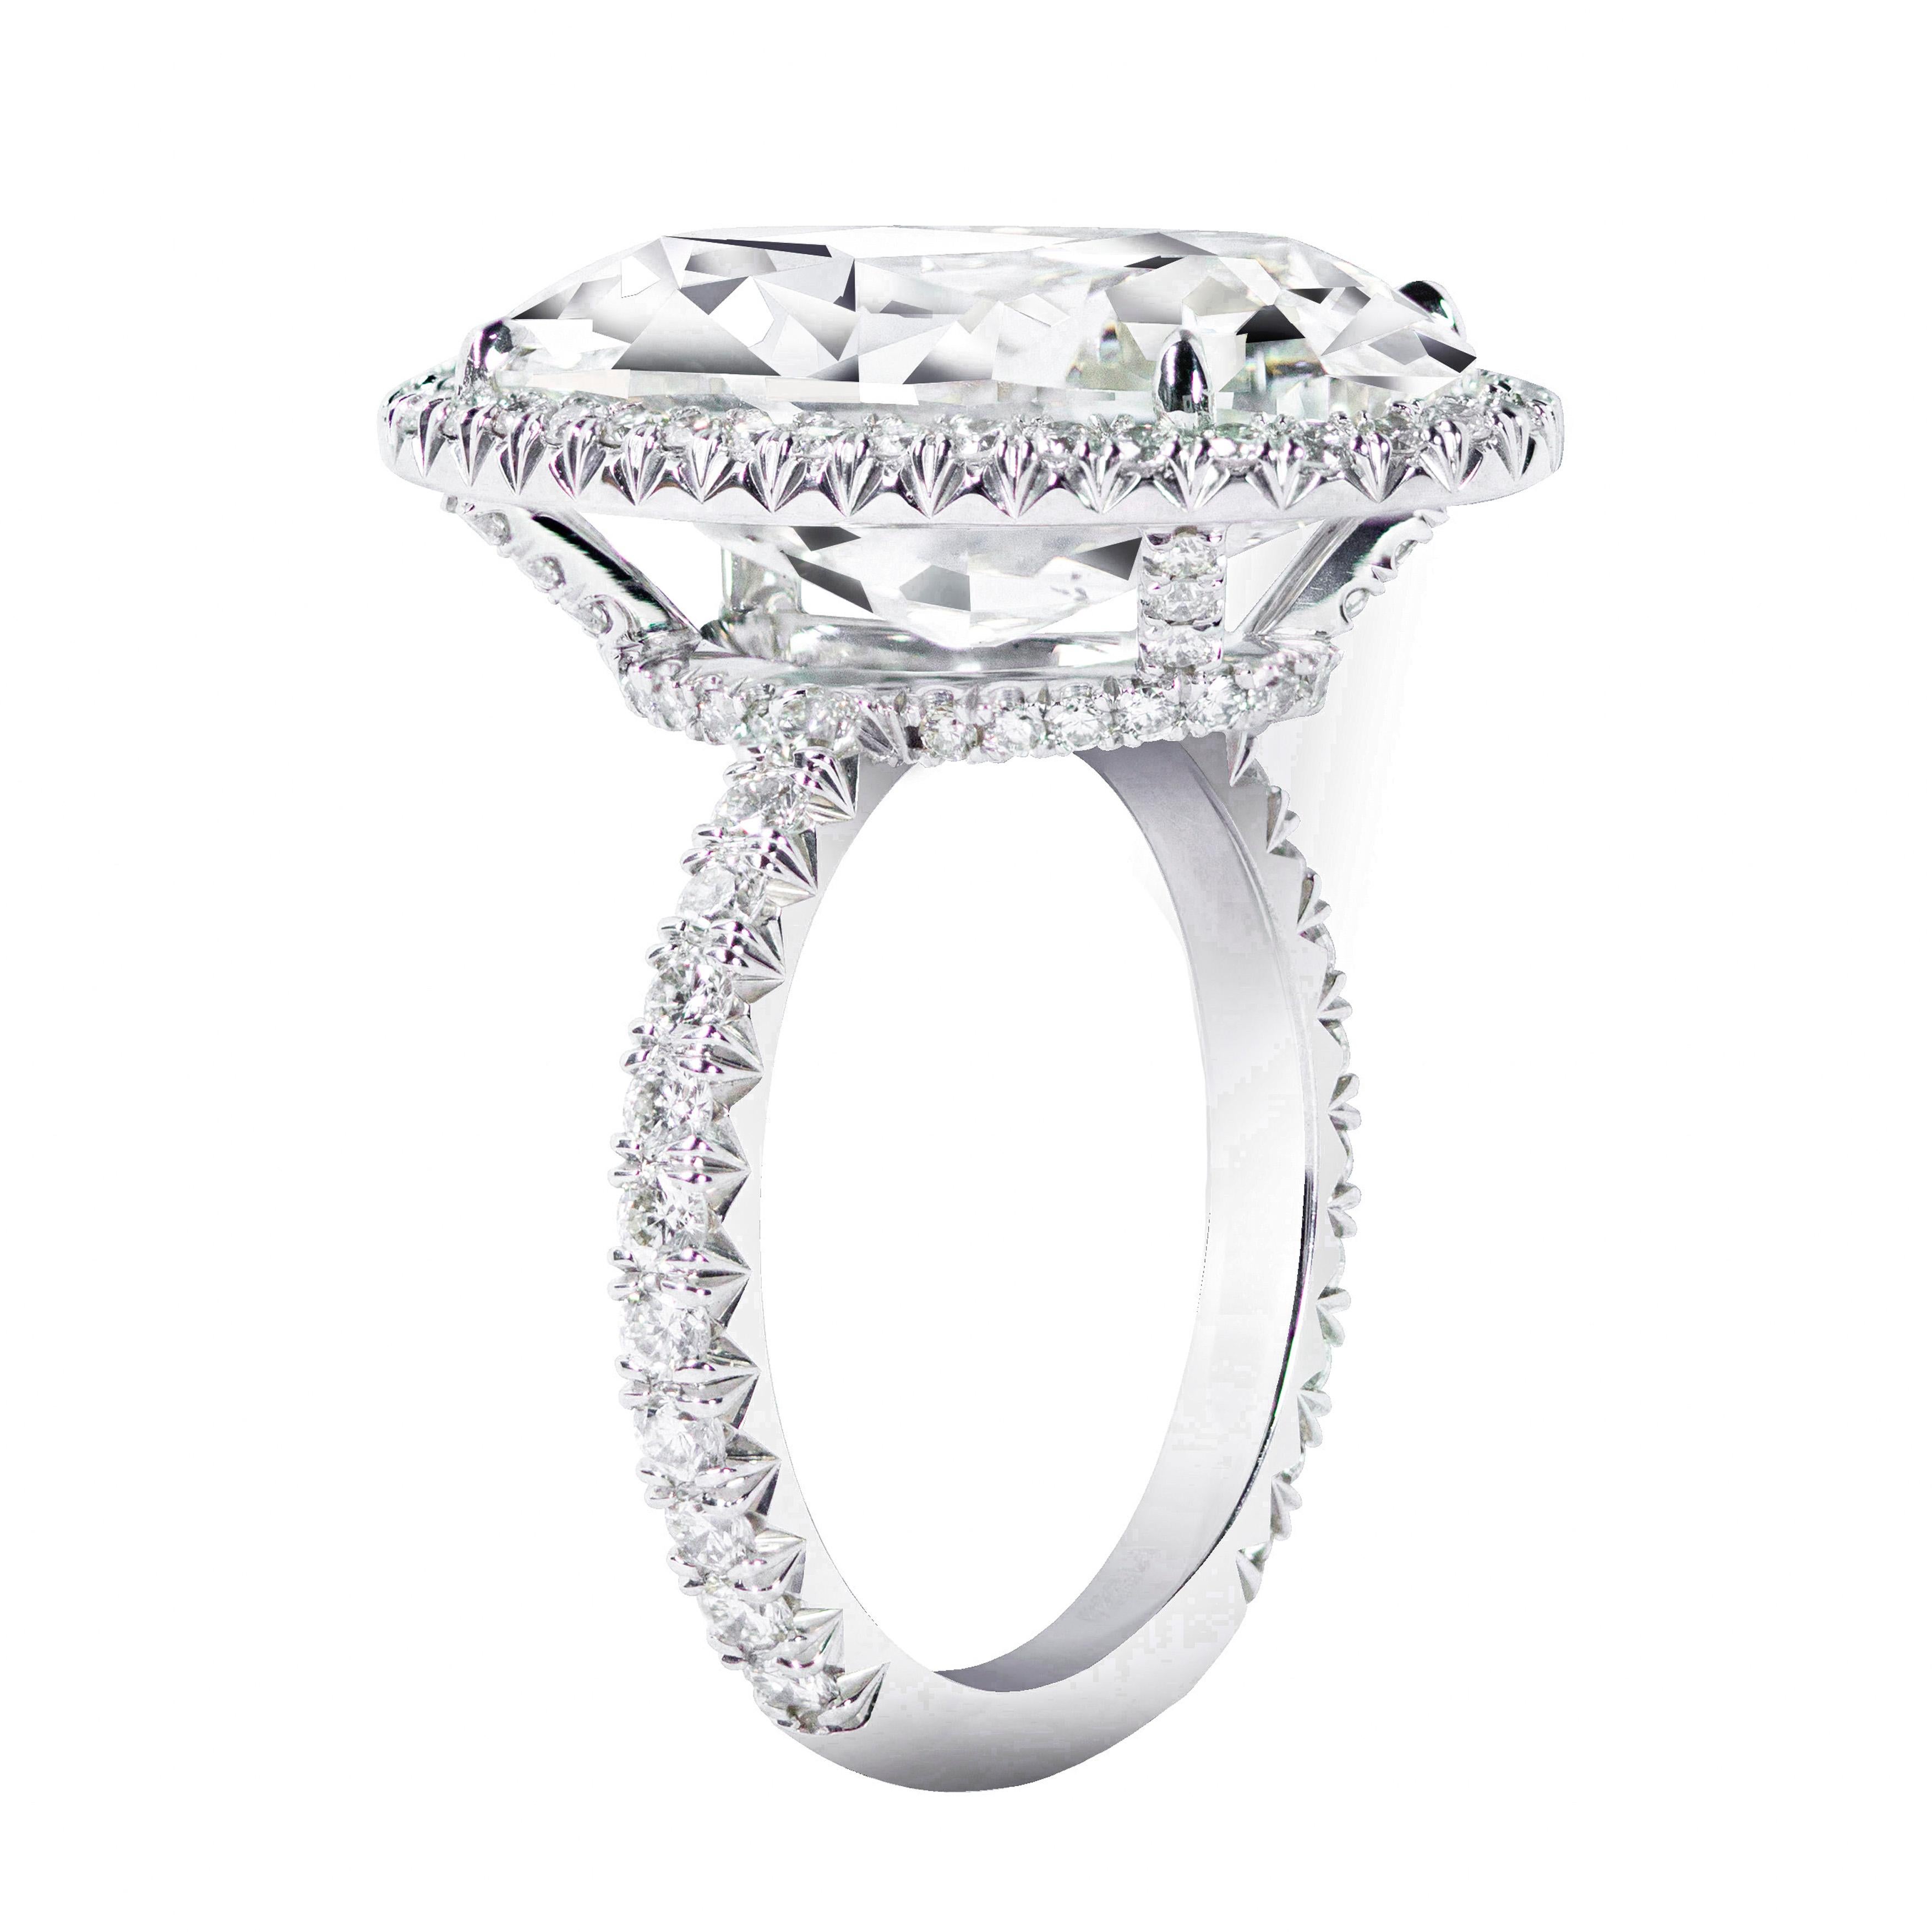 Elegantly made engagement ring features a 10.09 carats oval cut diamond center stone certified by the GIA as J color and SI2 in clarity. Set in a four prong diamond encrusted basket halo setting made in platinum. Shank is encrusted with brilliant